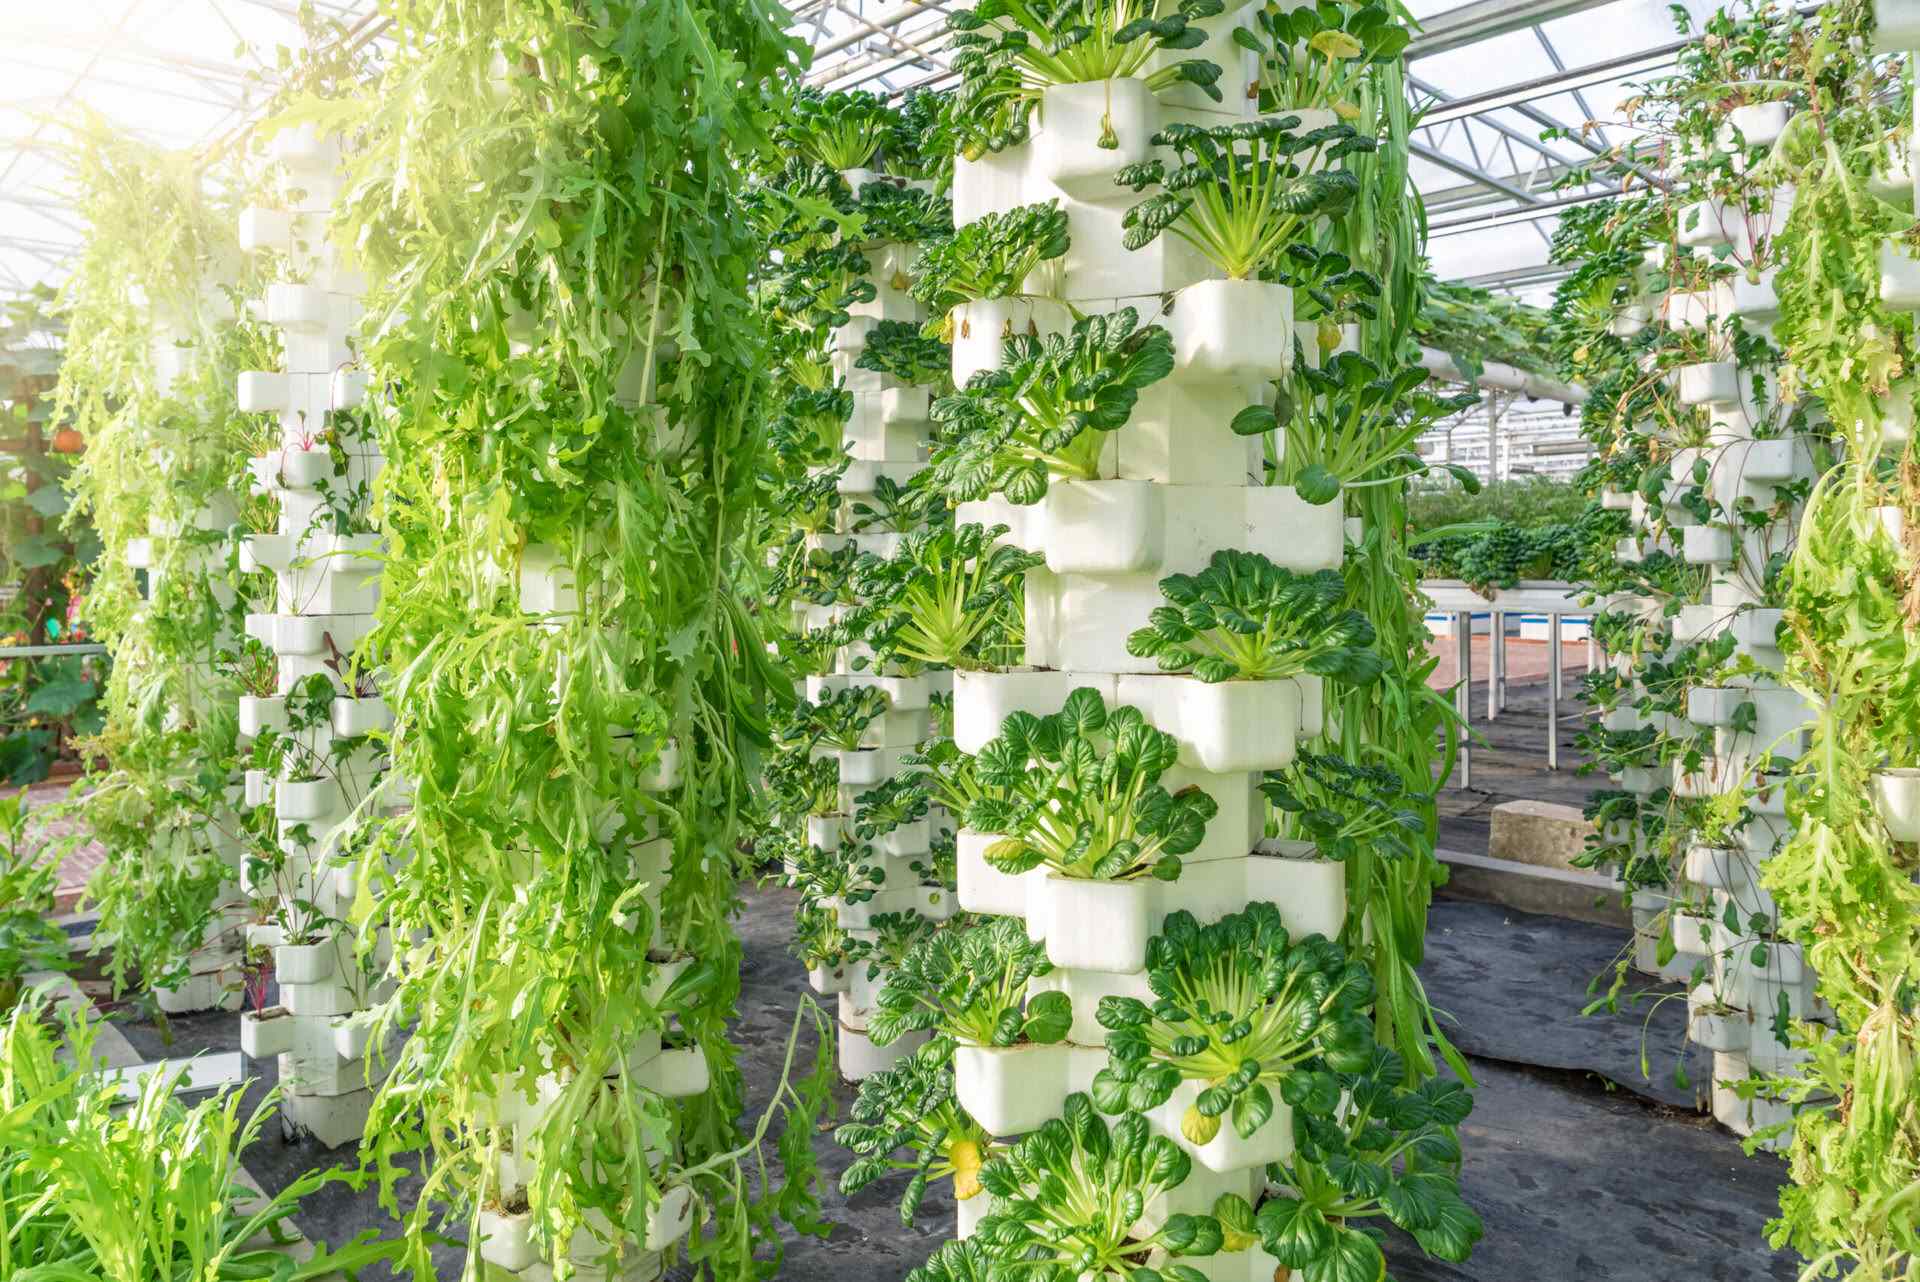 Why Is The Use Of Hydroponics Farming Most Likely Going To Increase In The Future?